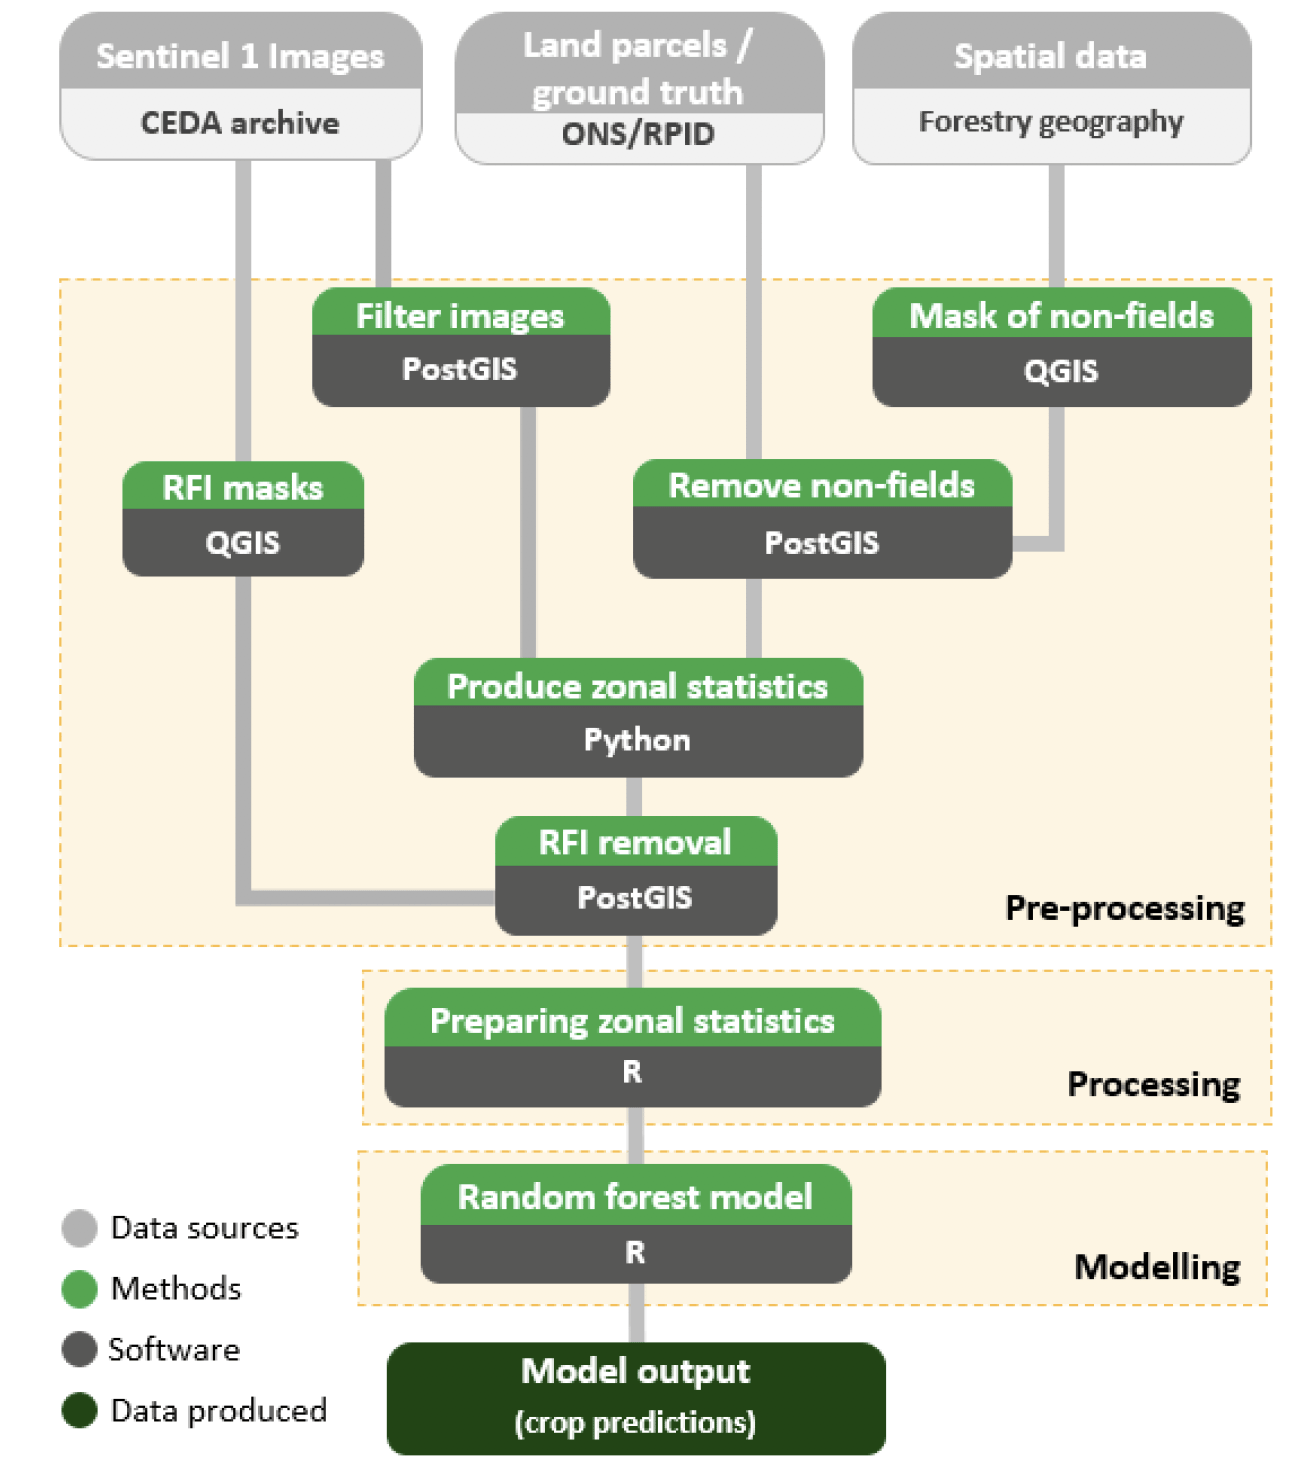 A flow chart showing the steps in the project, including pre-processing, processing and modelling.